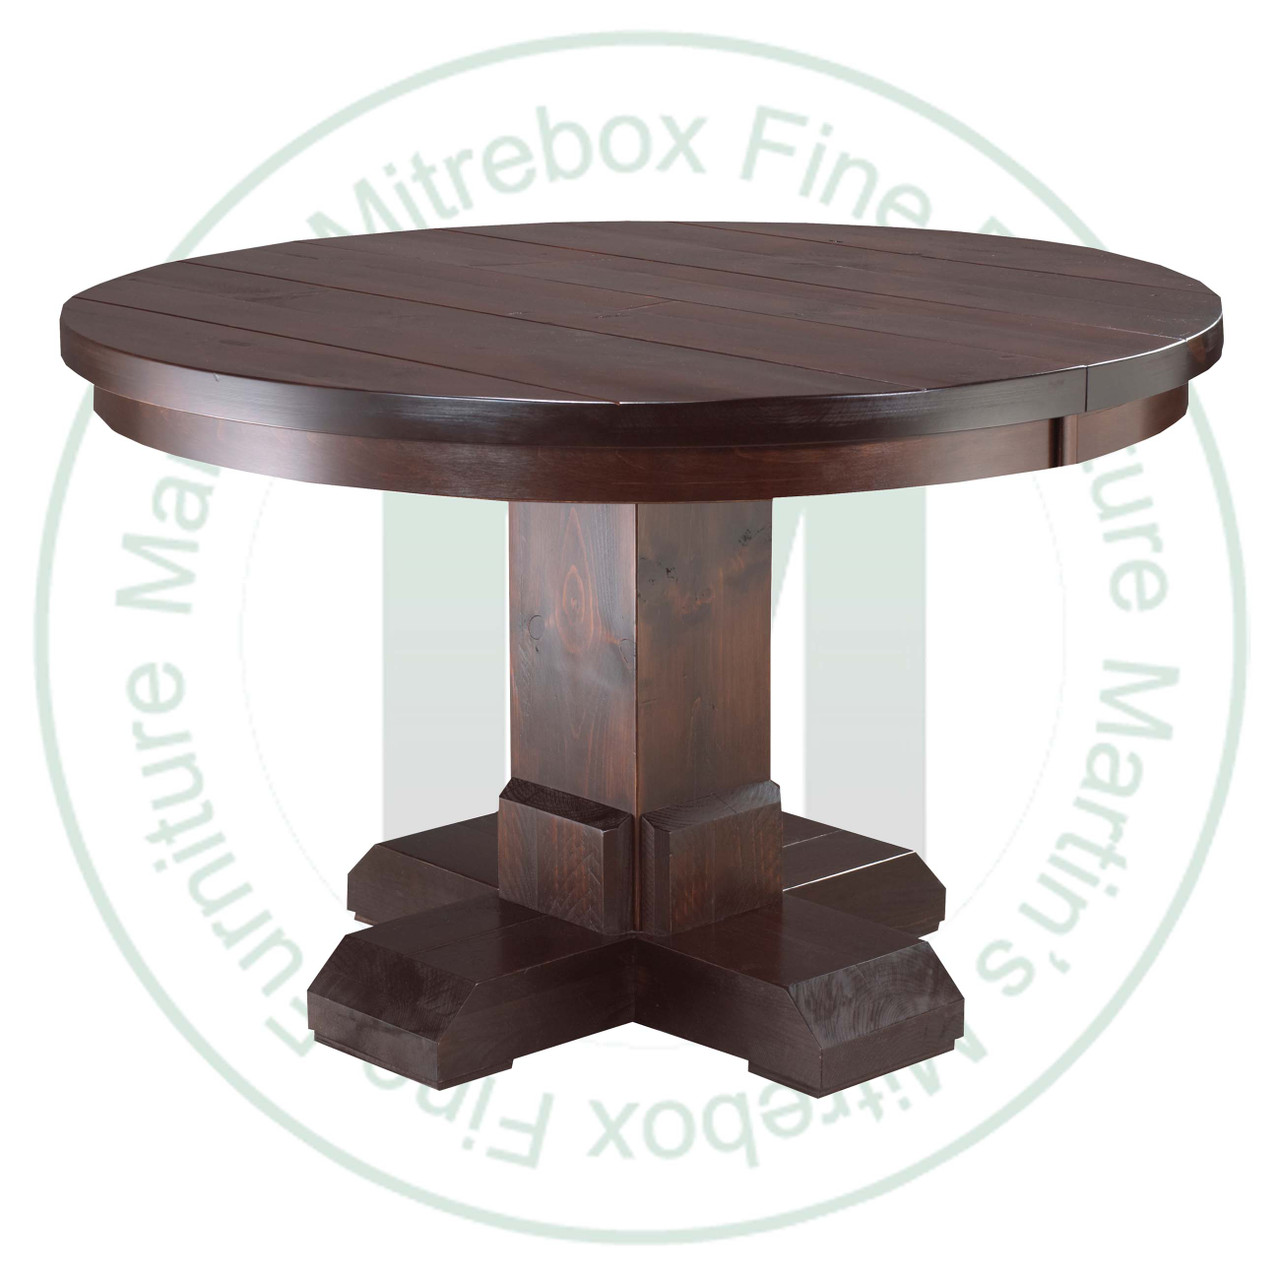 Oak Shrewsbury Single Pedestal Table 54''D x 54''W x 30''H With 2 - 12'' Leaves Table. Table Has 1.25'' Thick Top.